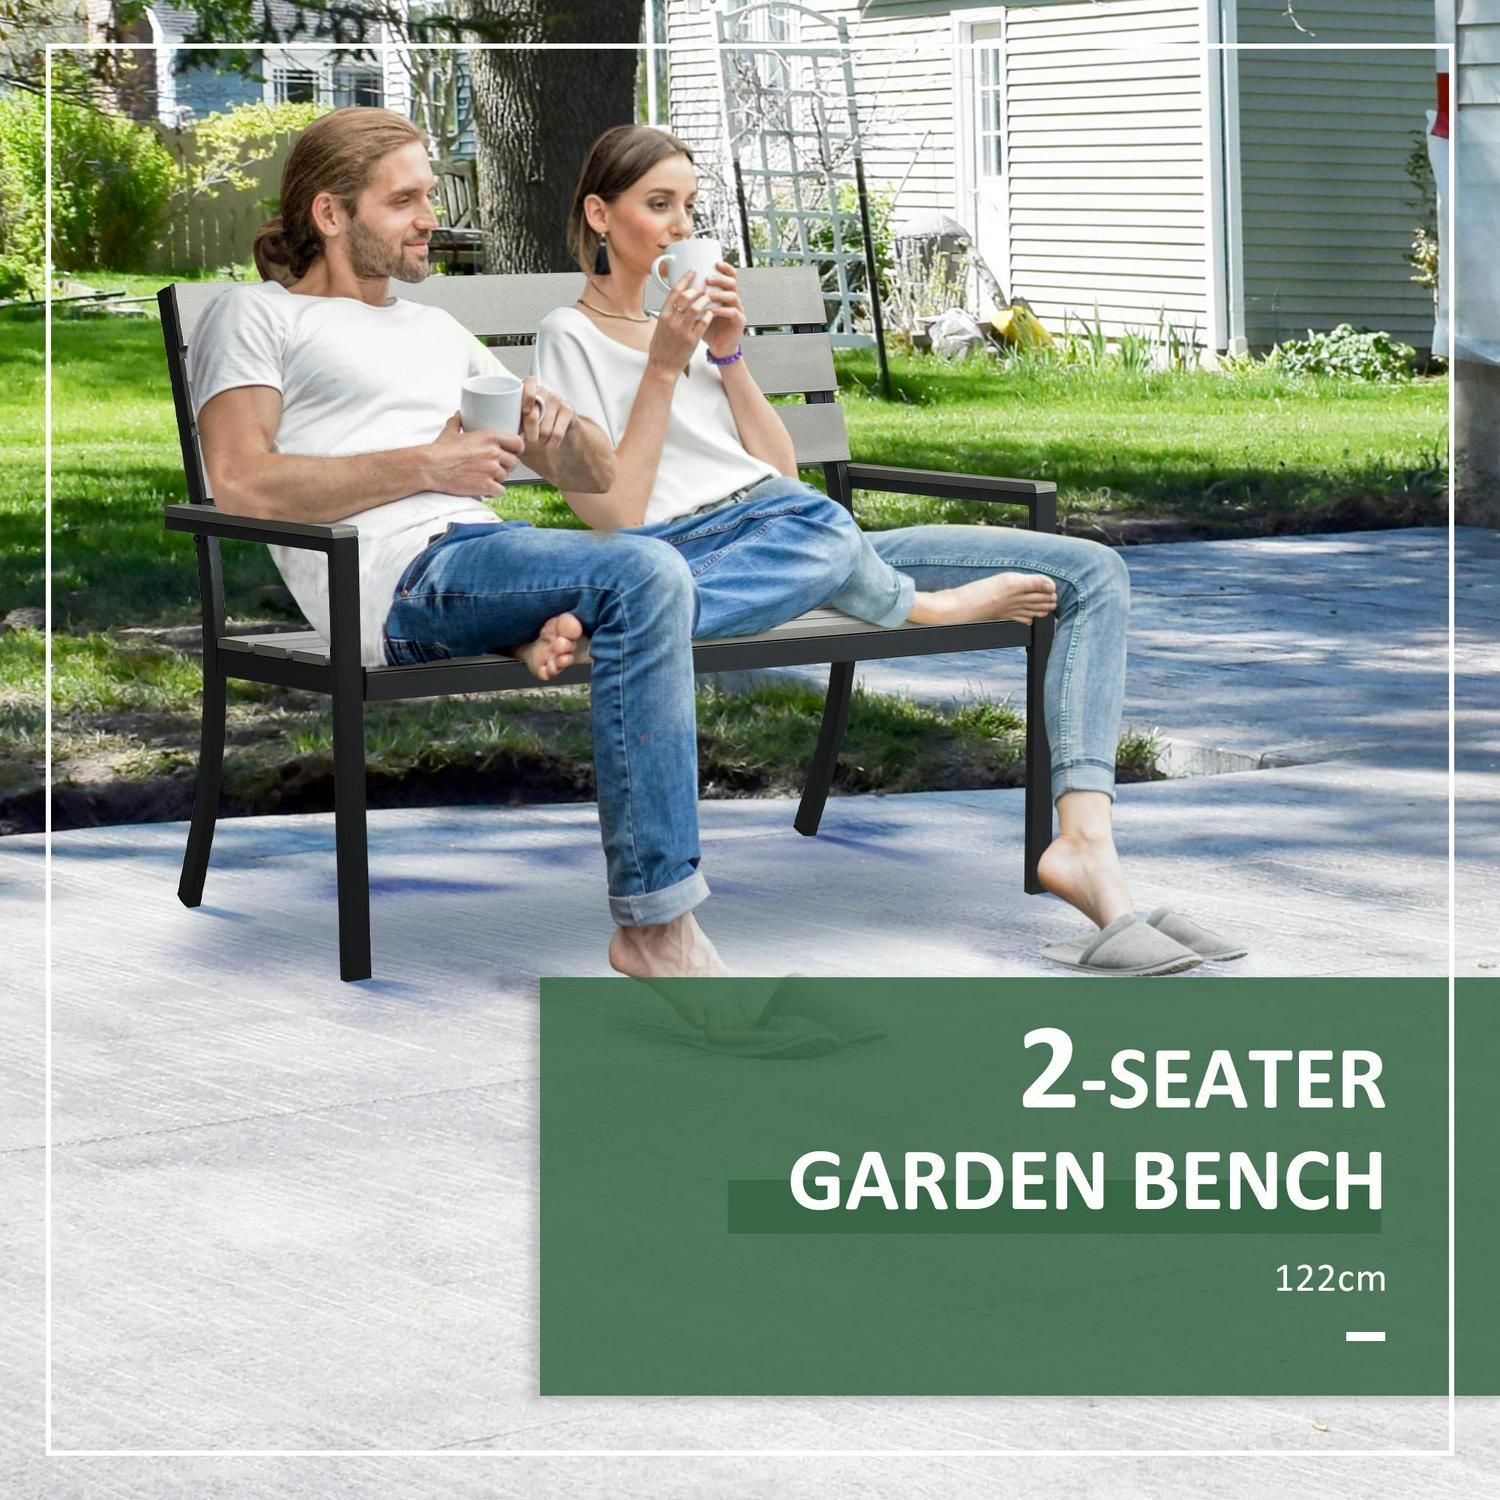 2 Seater Garden Bench, Slatted Outdoor With Steel Frame, Loveseat, (122 X 65 X 92) Cm, Grey